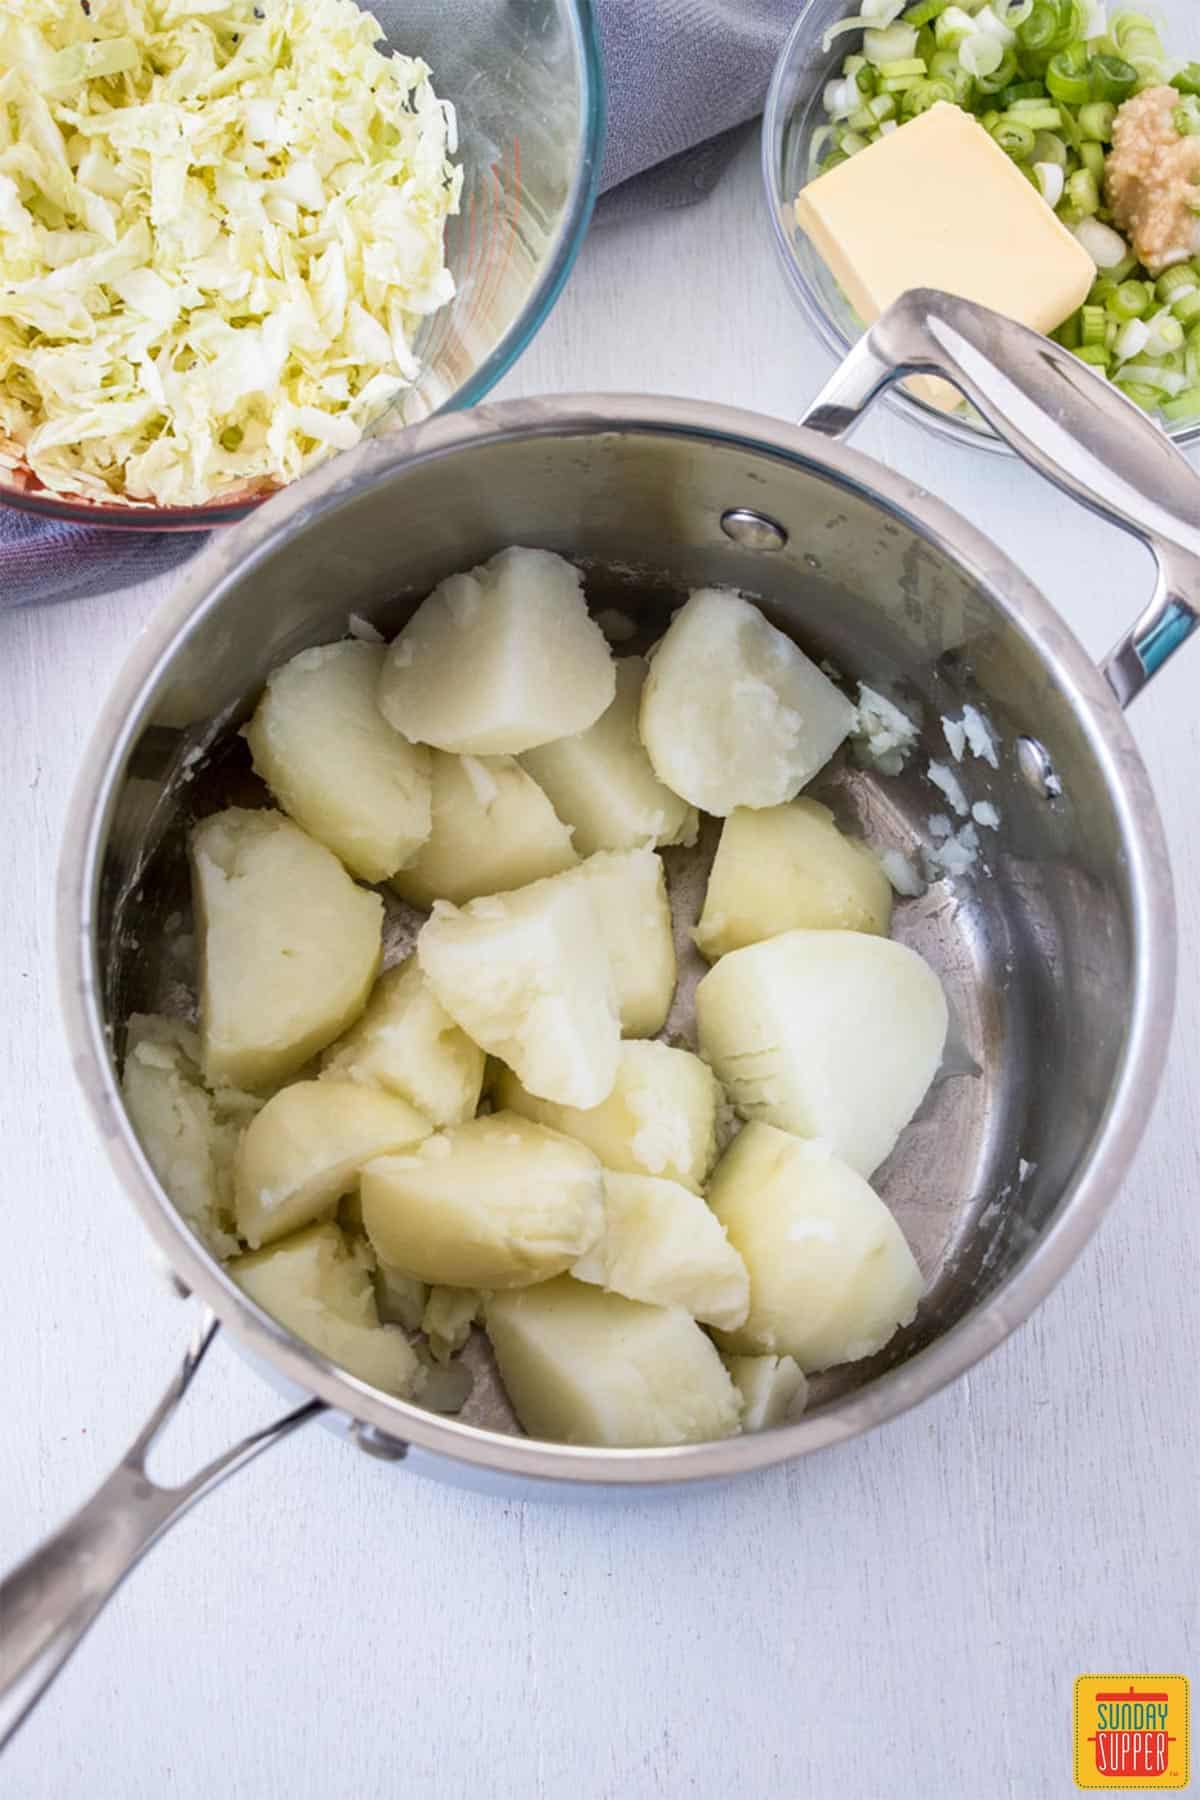 Soft potatoes after boiling